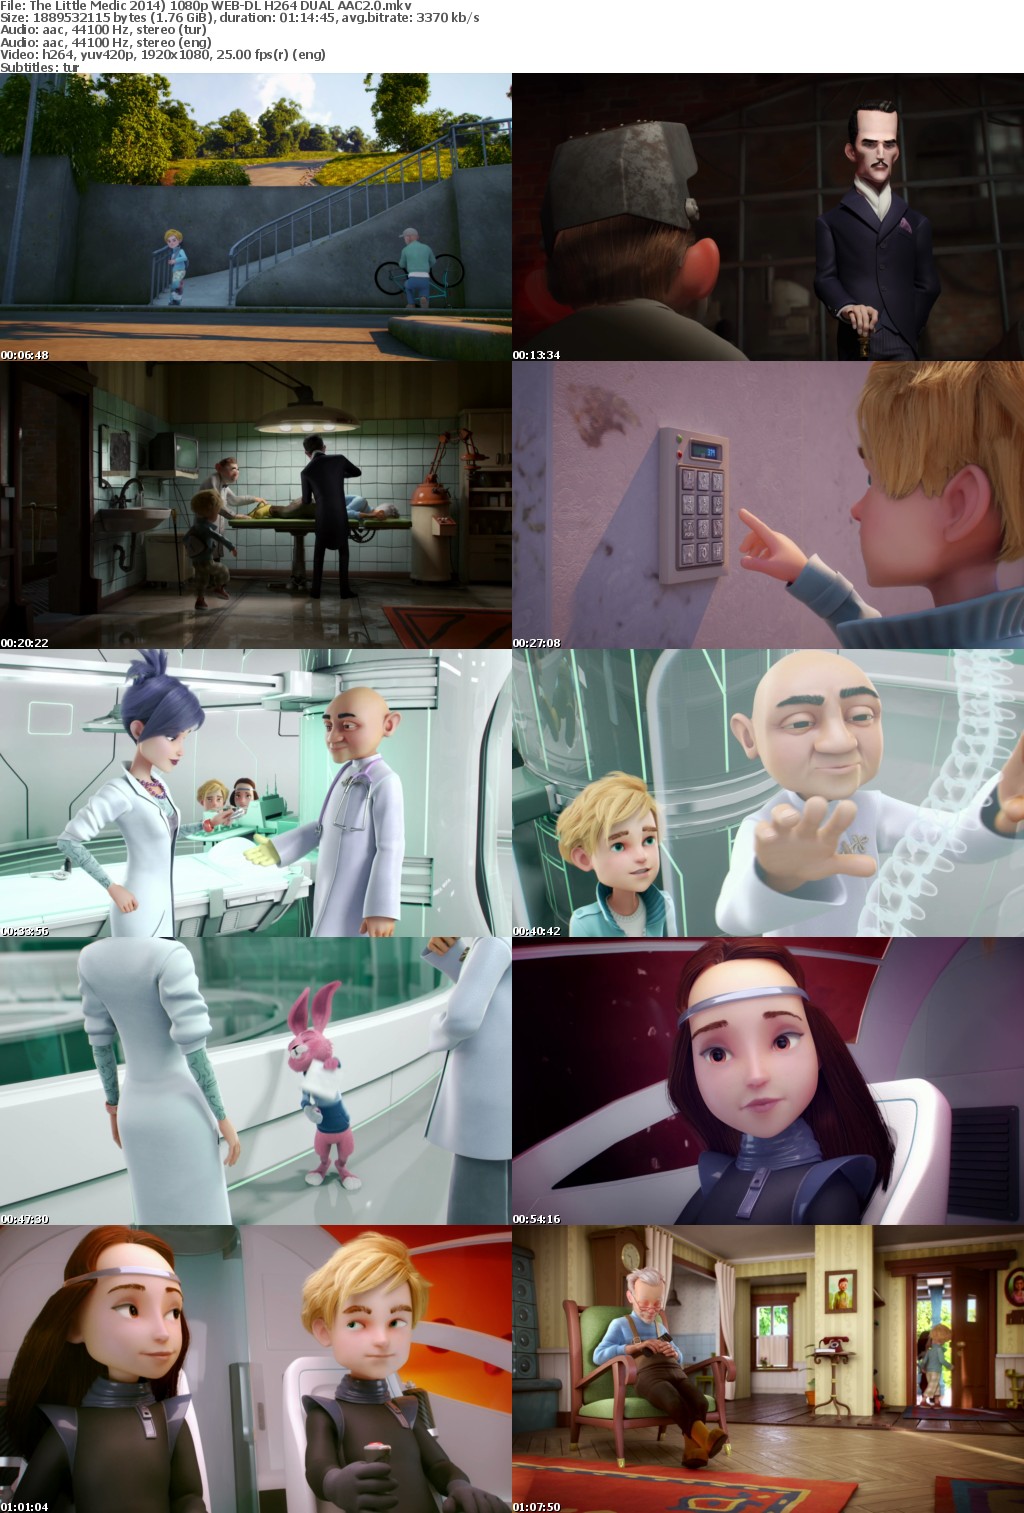 The Little Medic (2014) 1080p WEB-DL H264 DUAL AAC2 0